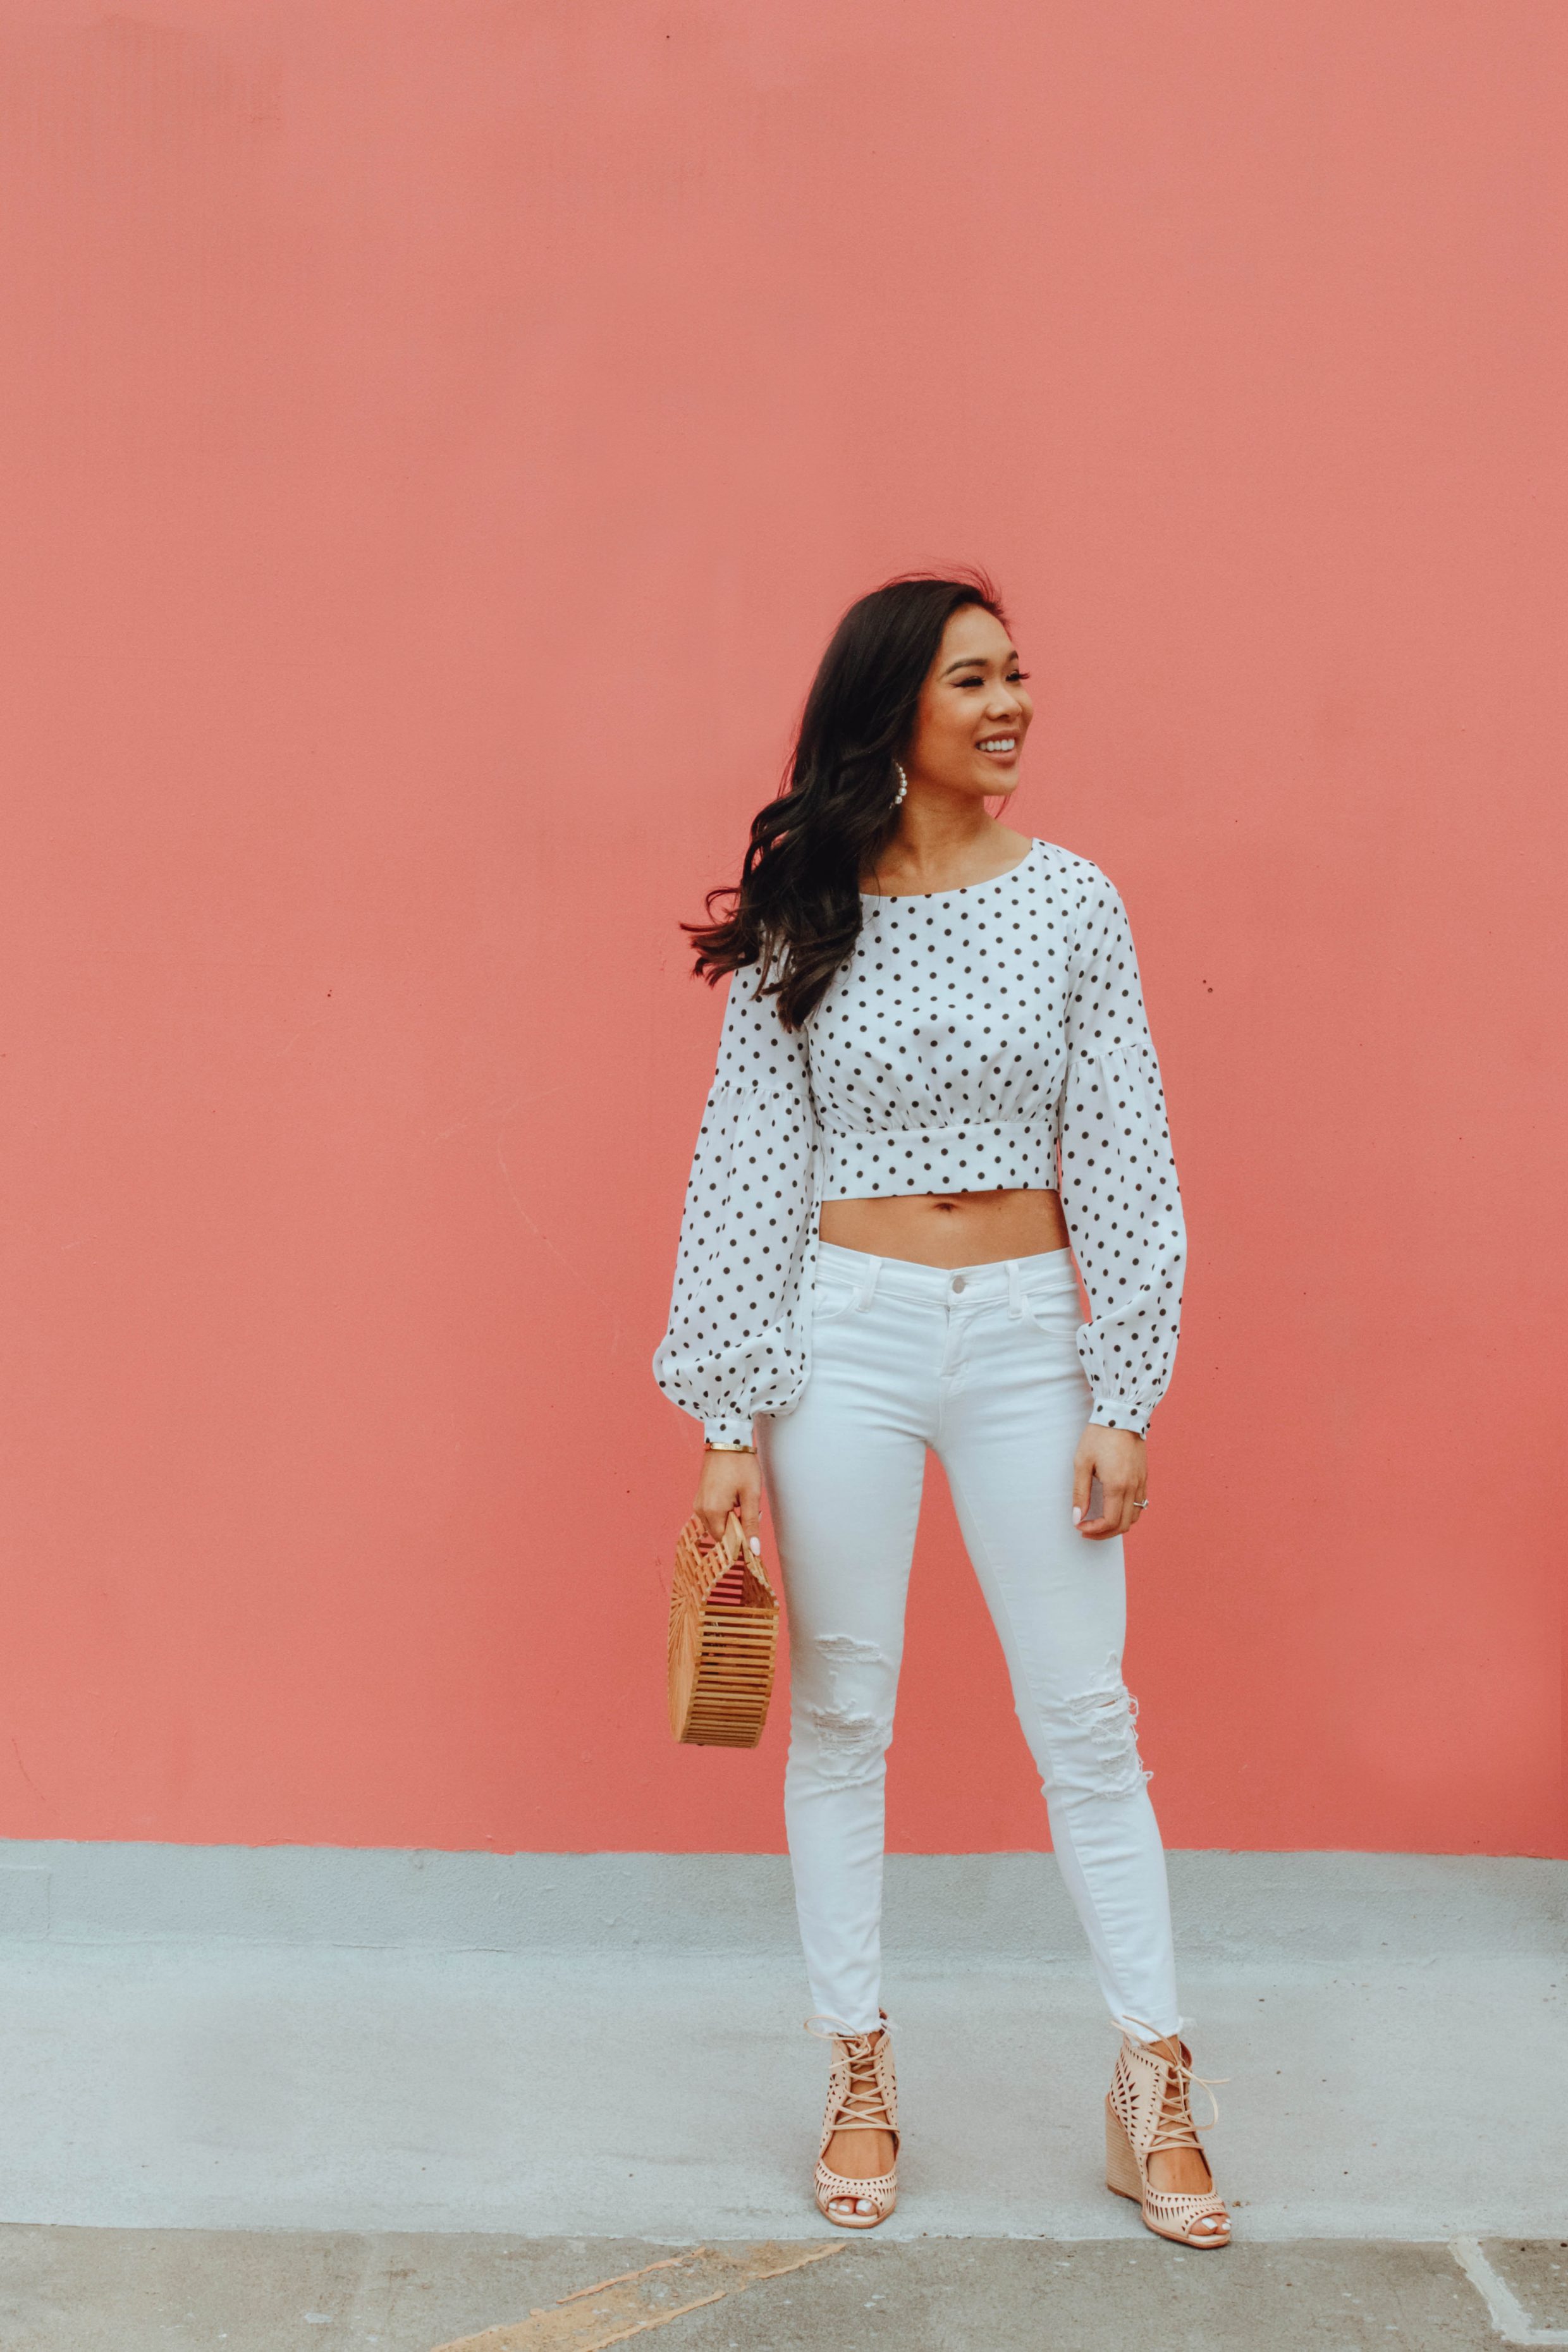 Hoang-Kim wears a polka dot crop top with white jeans and Cult Gaia bamboo bag